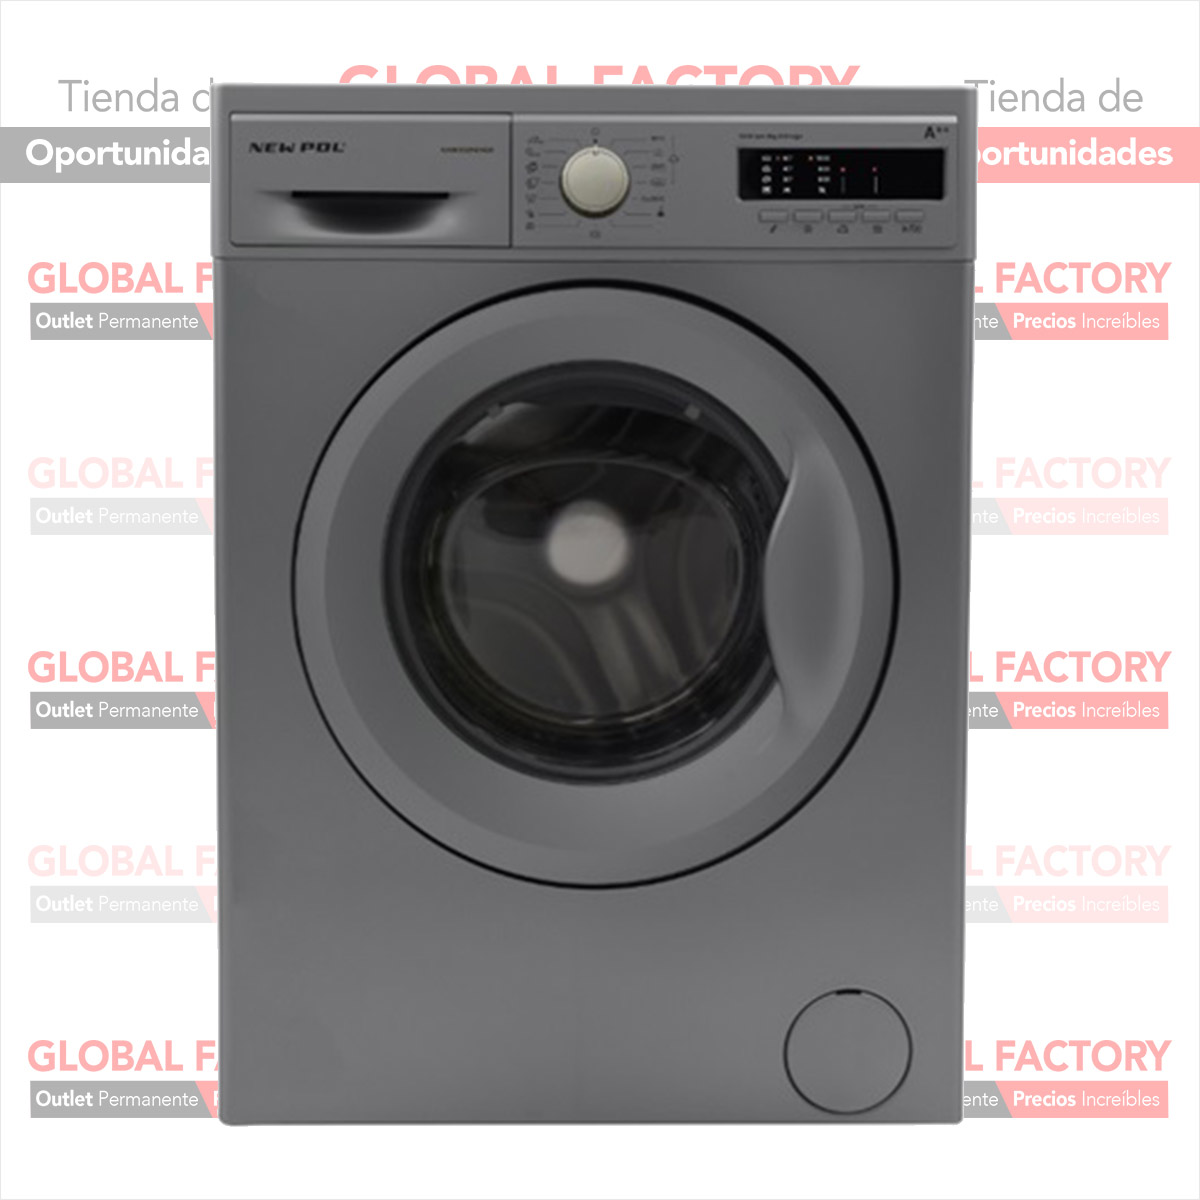 NEW POL INOX – Outlet Global Factory